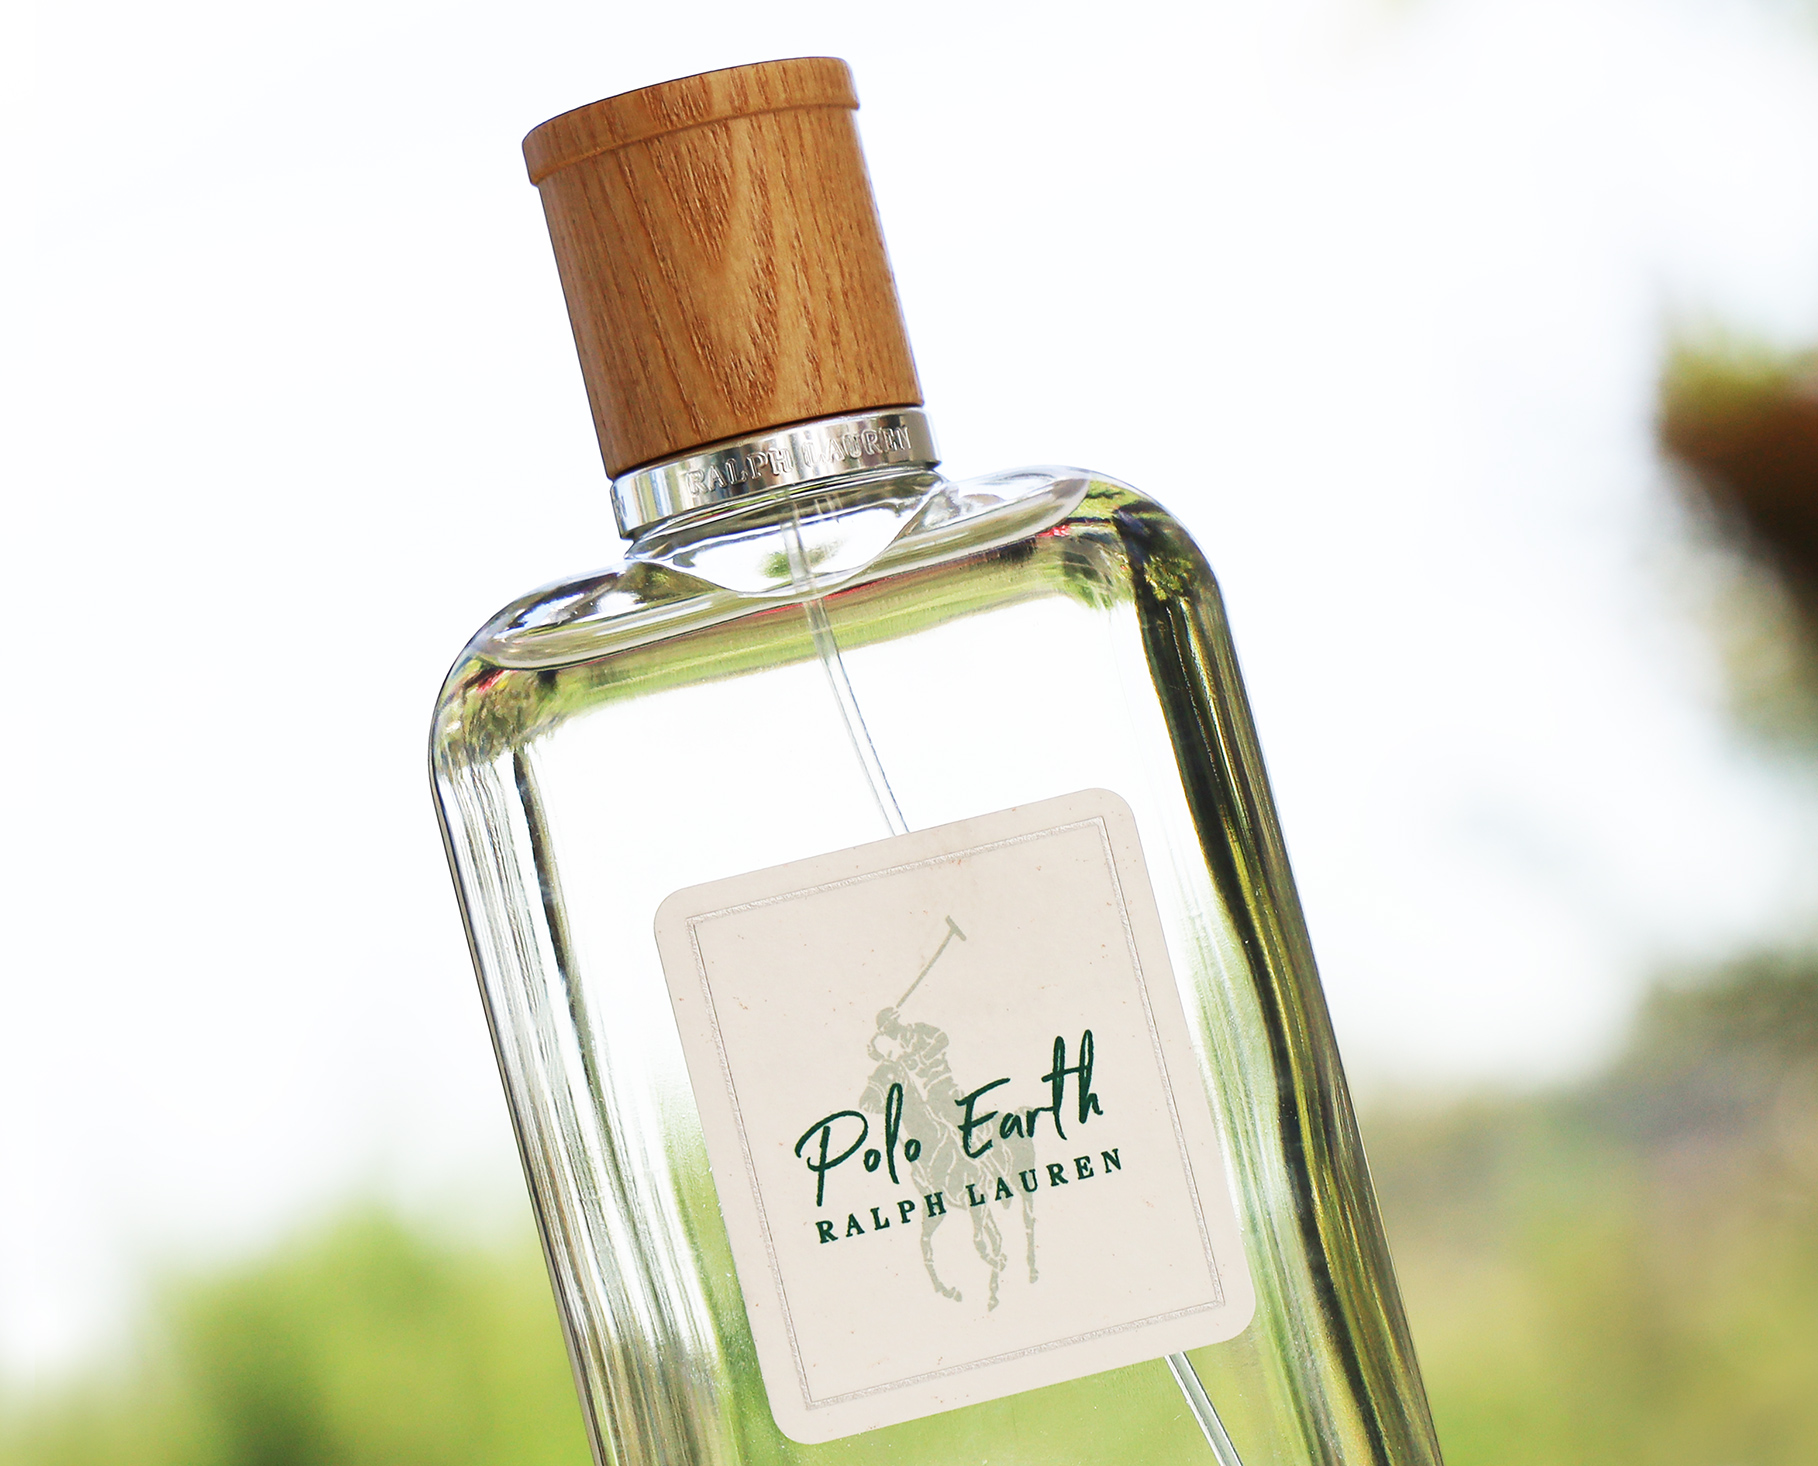 Polo Earth Ralph Lauren Review ~ Fragrance Reviews